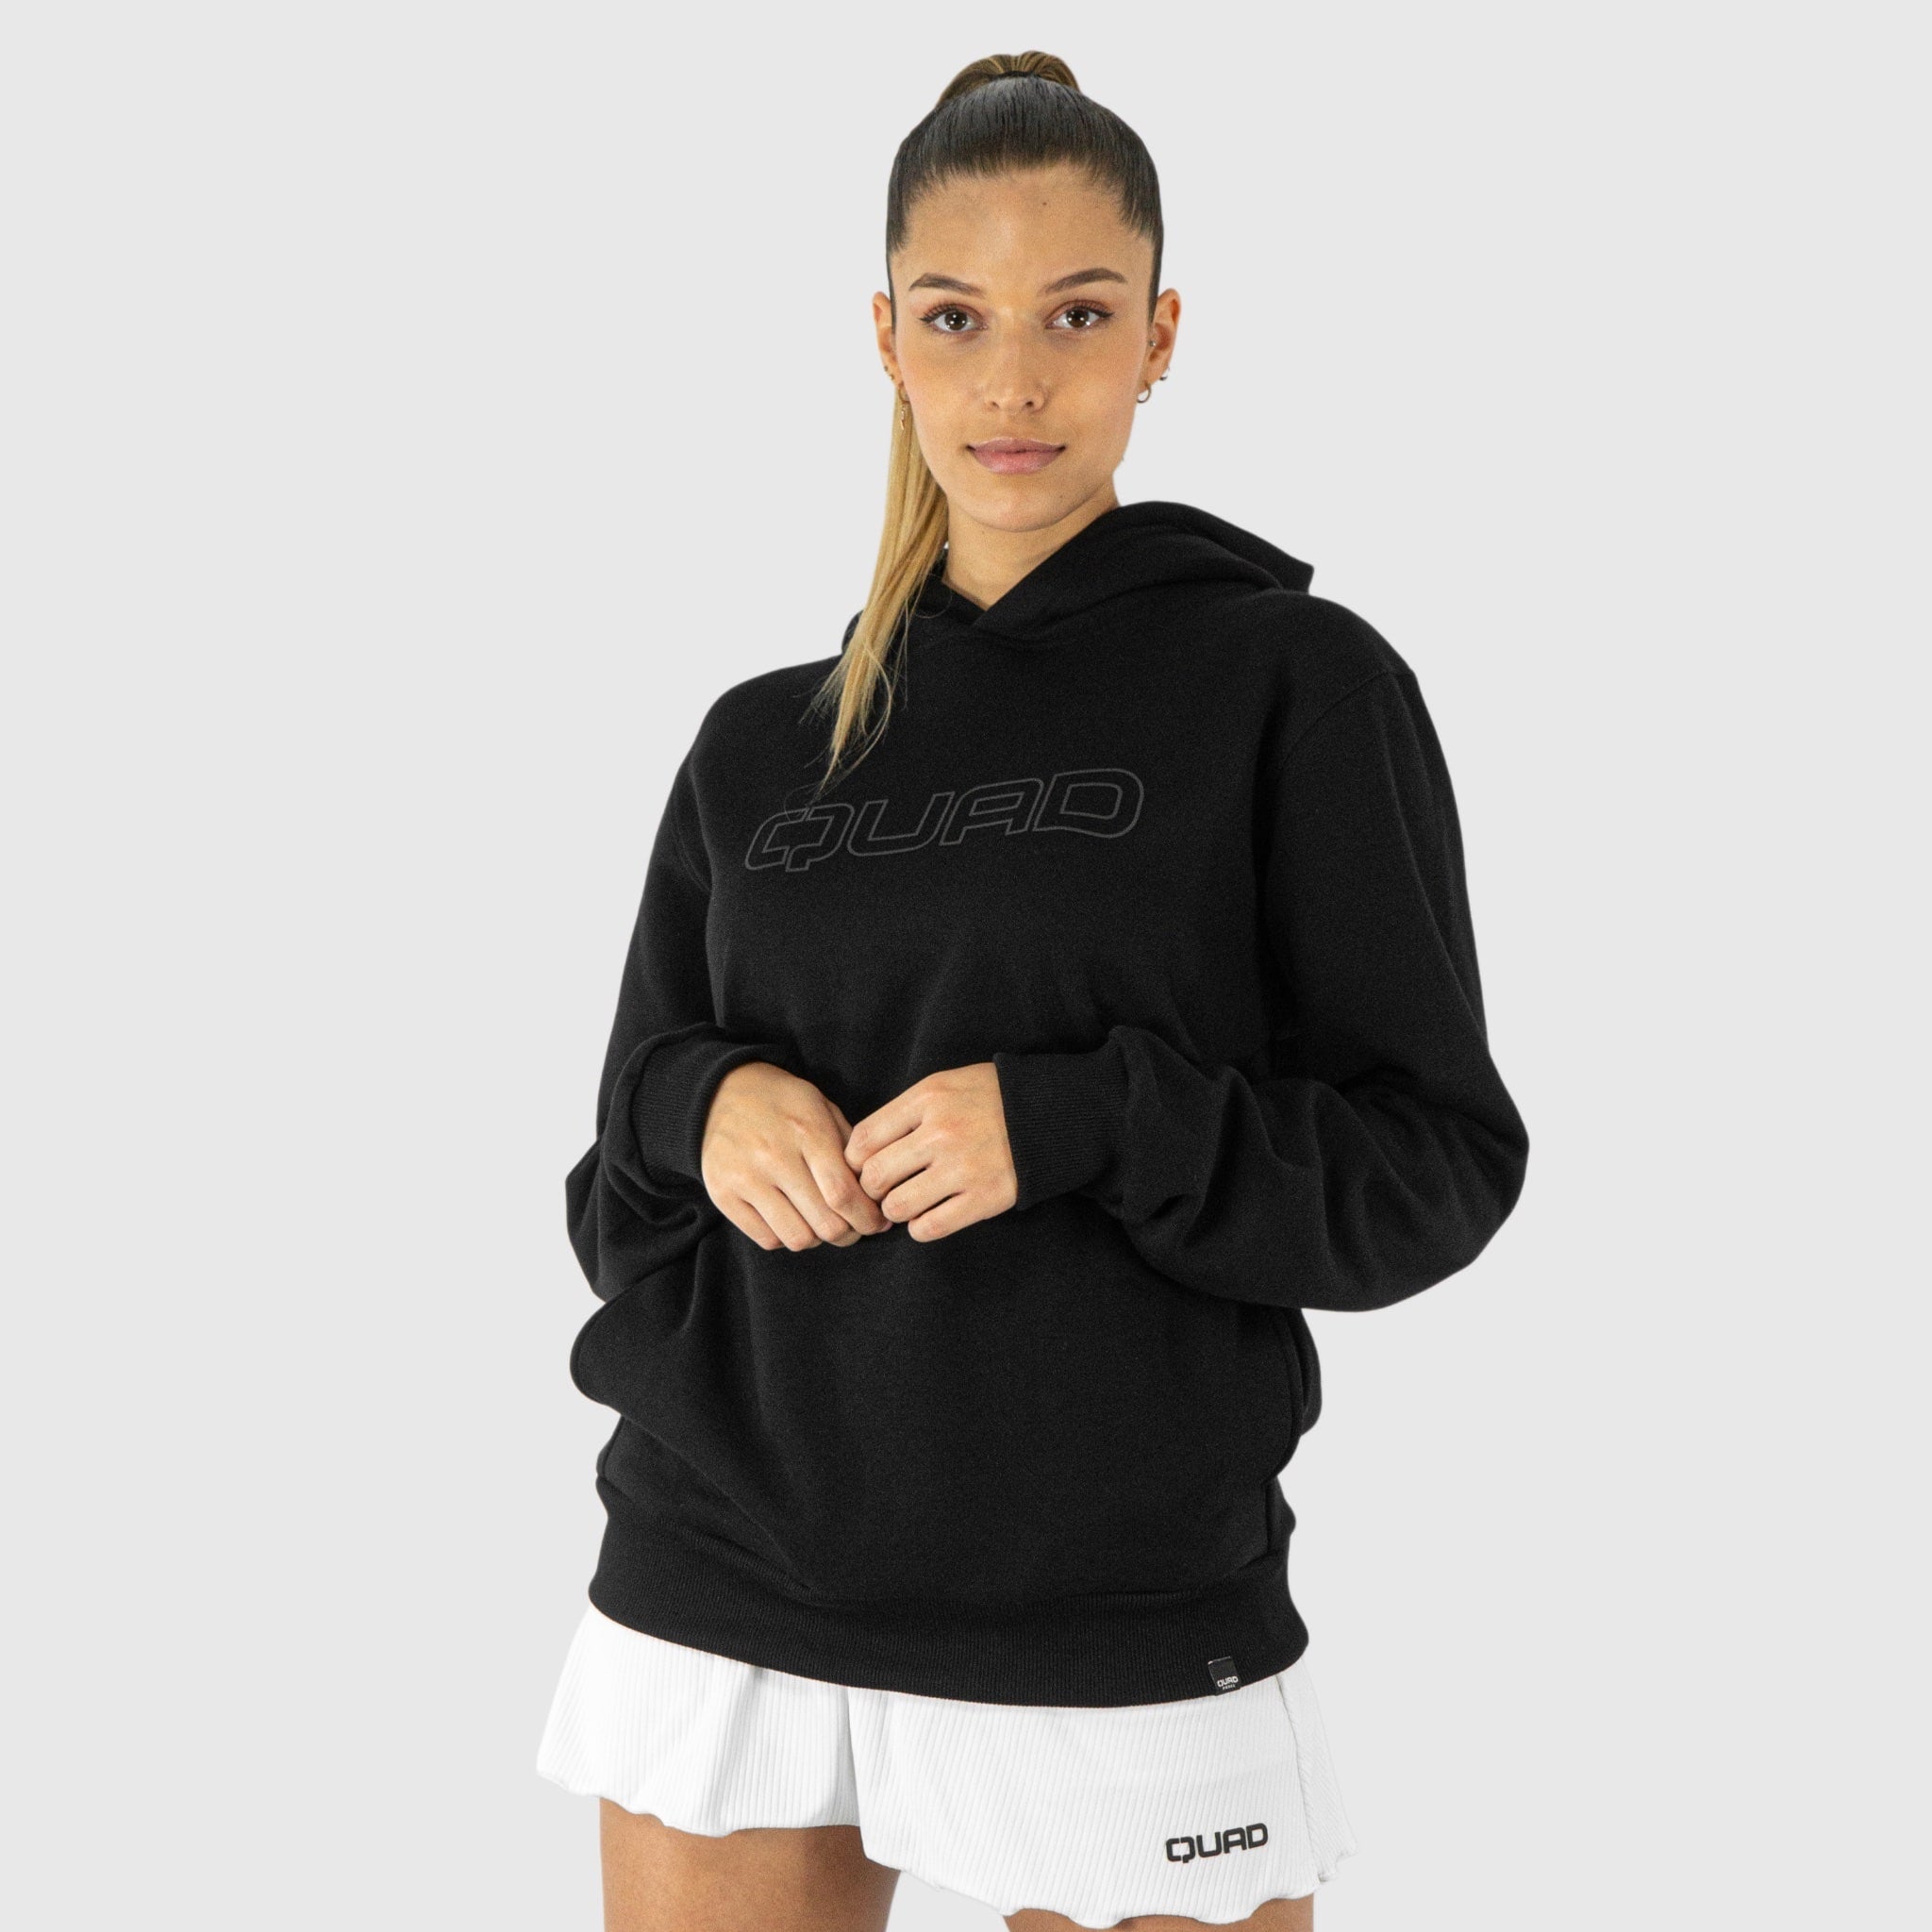 Quad Padel Essential hoodie woman front view